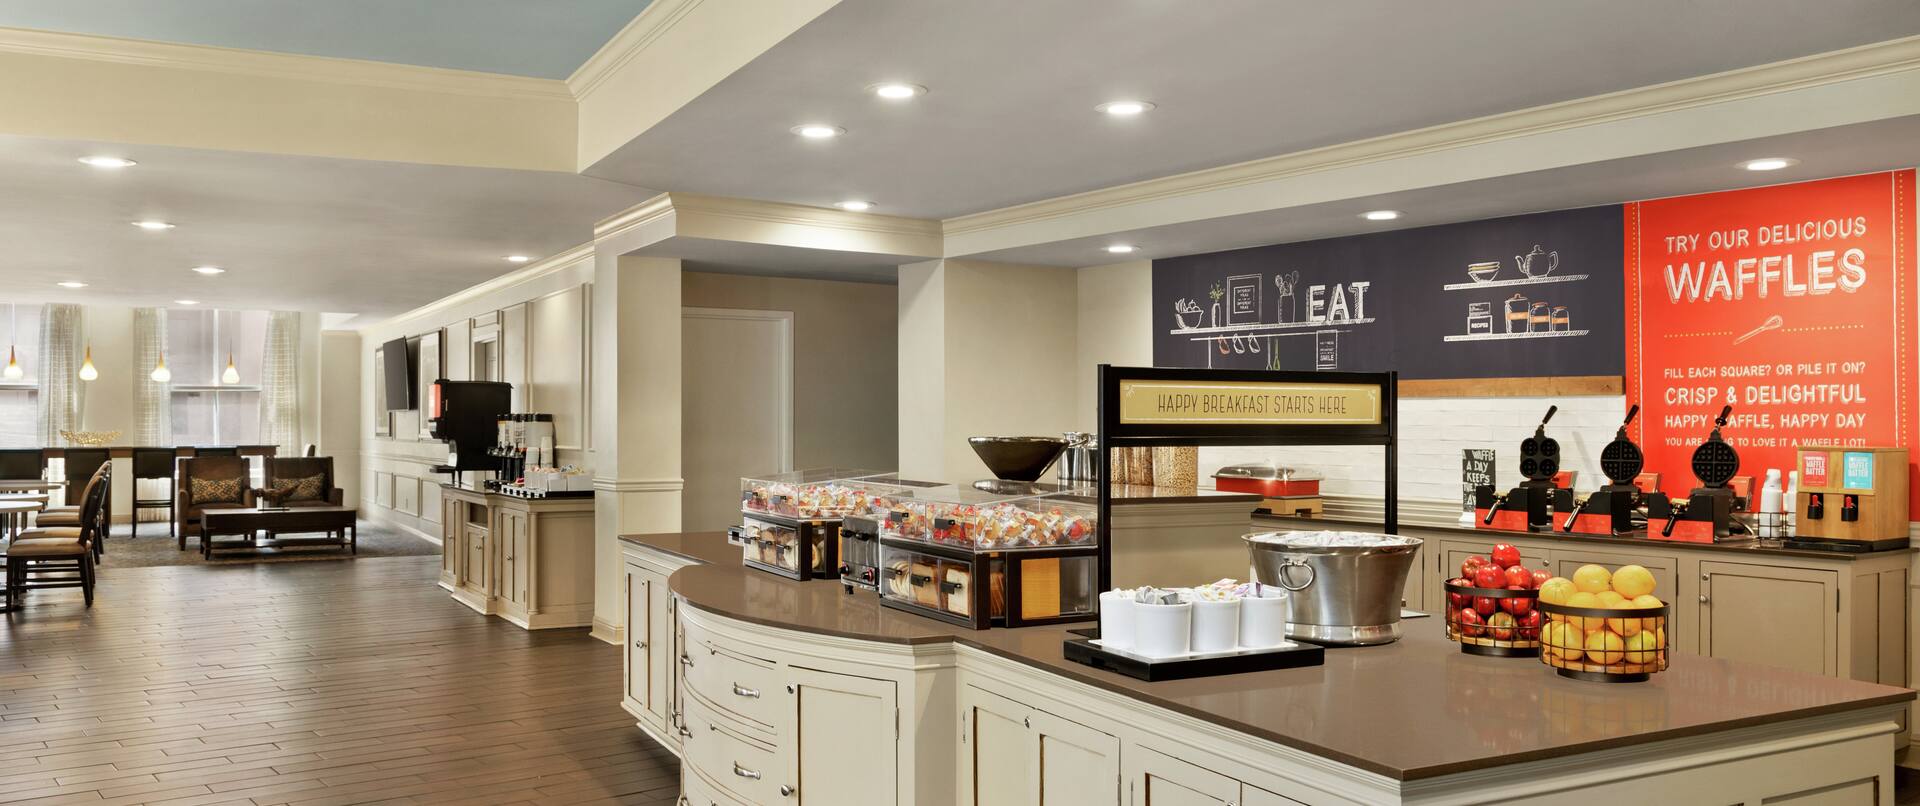 Bright breakfast area featuring a daily complimentary buffet overflowing with delicious food and beverages.